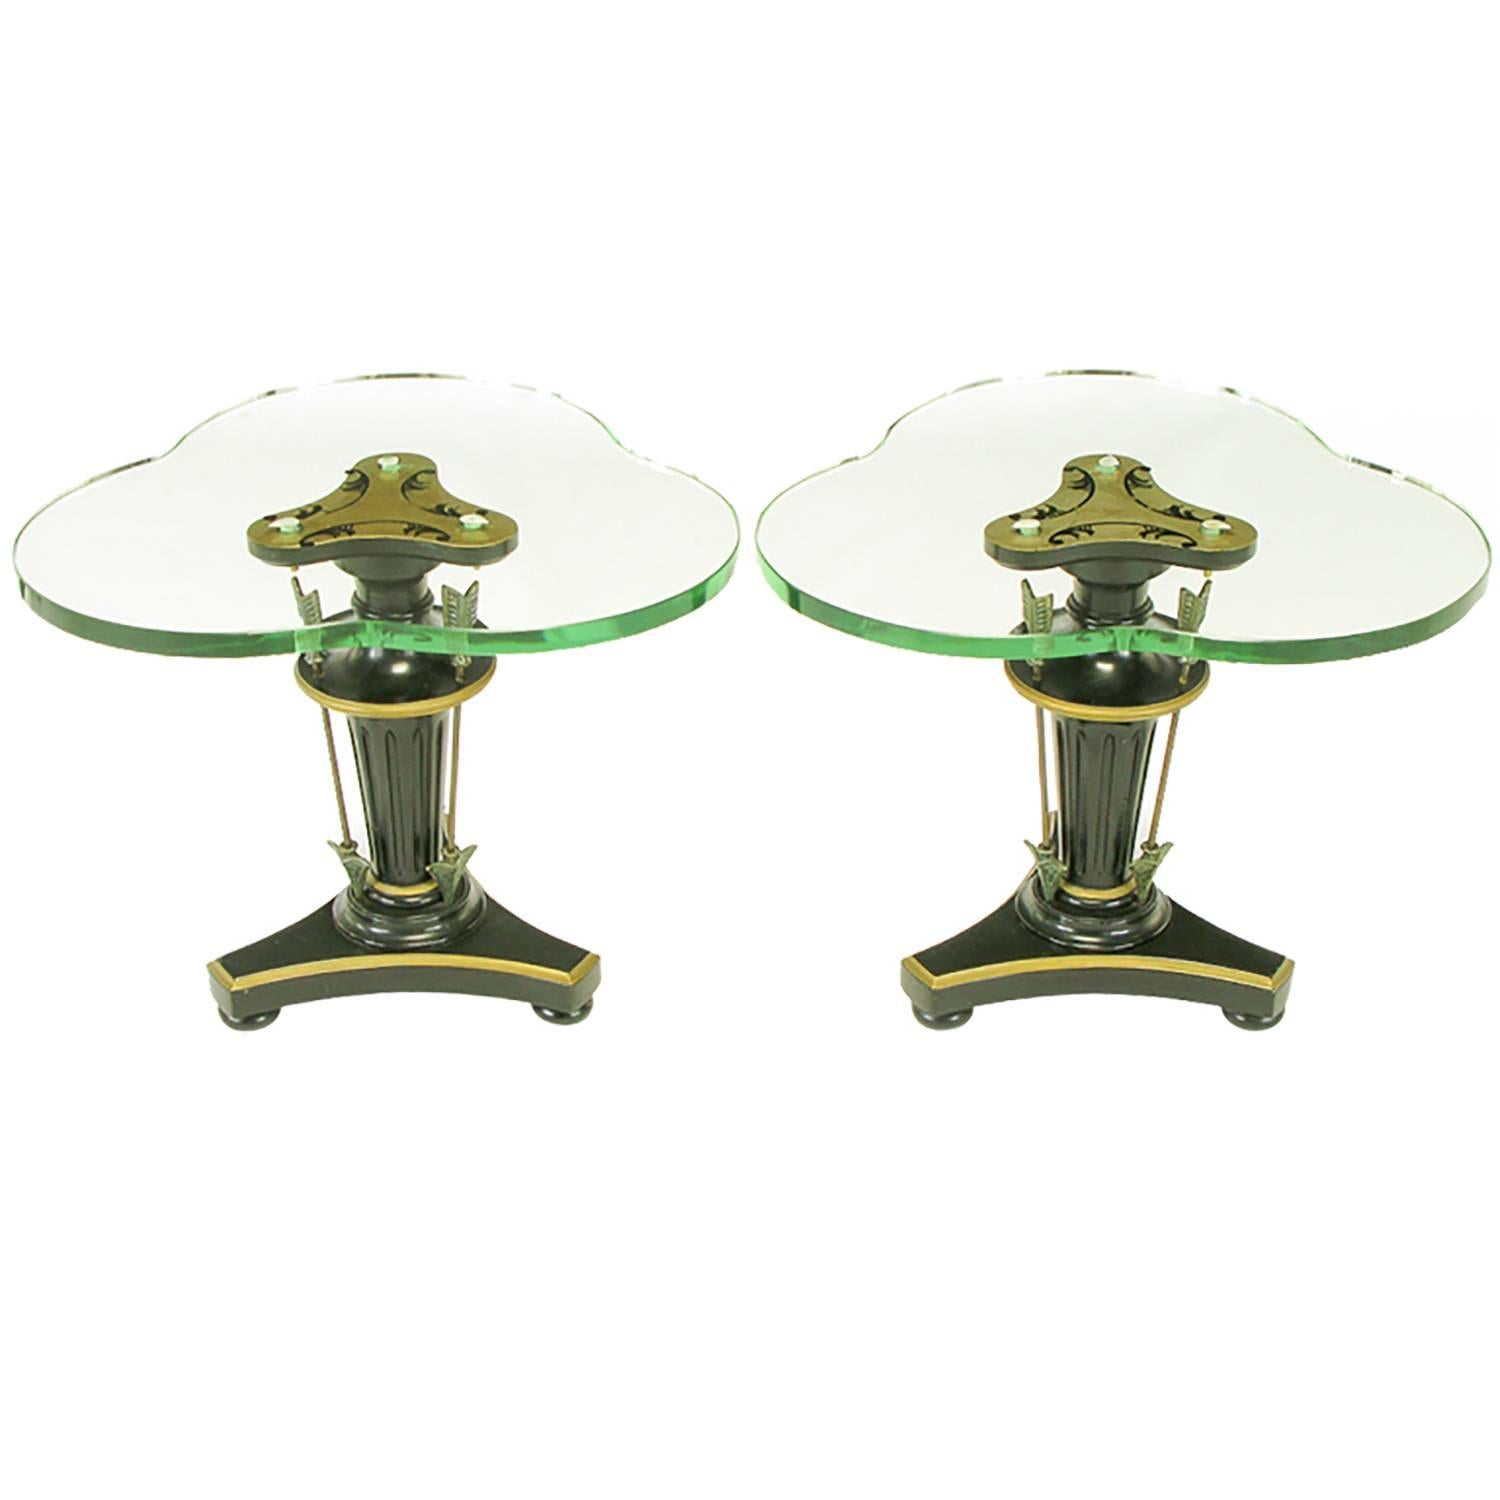 Pair of Black Lacquer & Parcel Gilt Empire Side Tables with Arrow Details For Sale